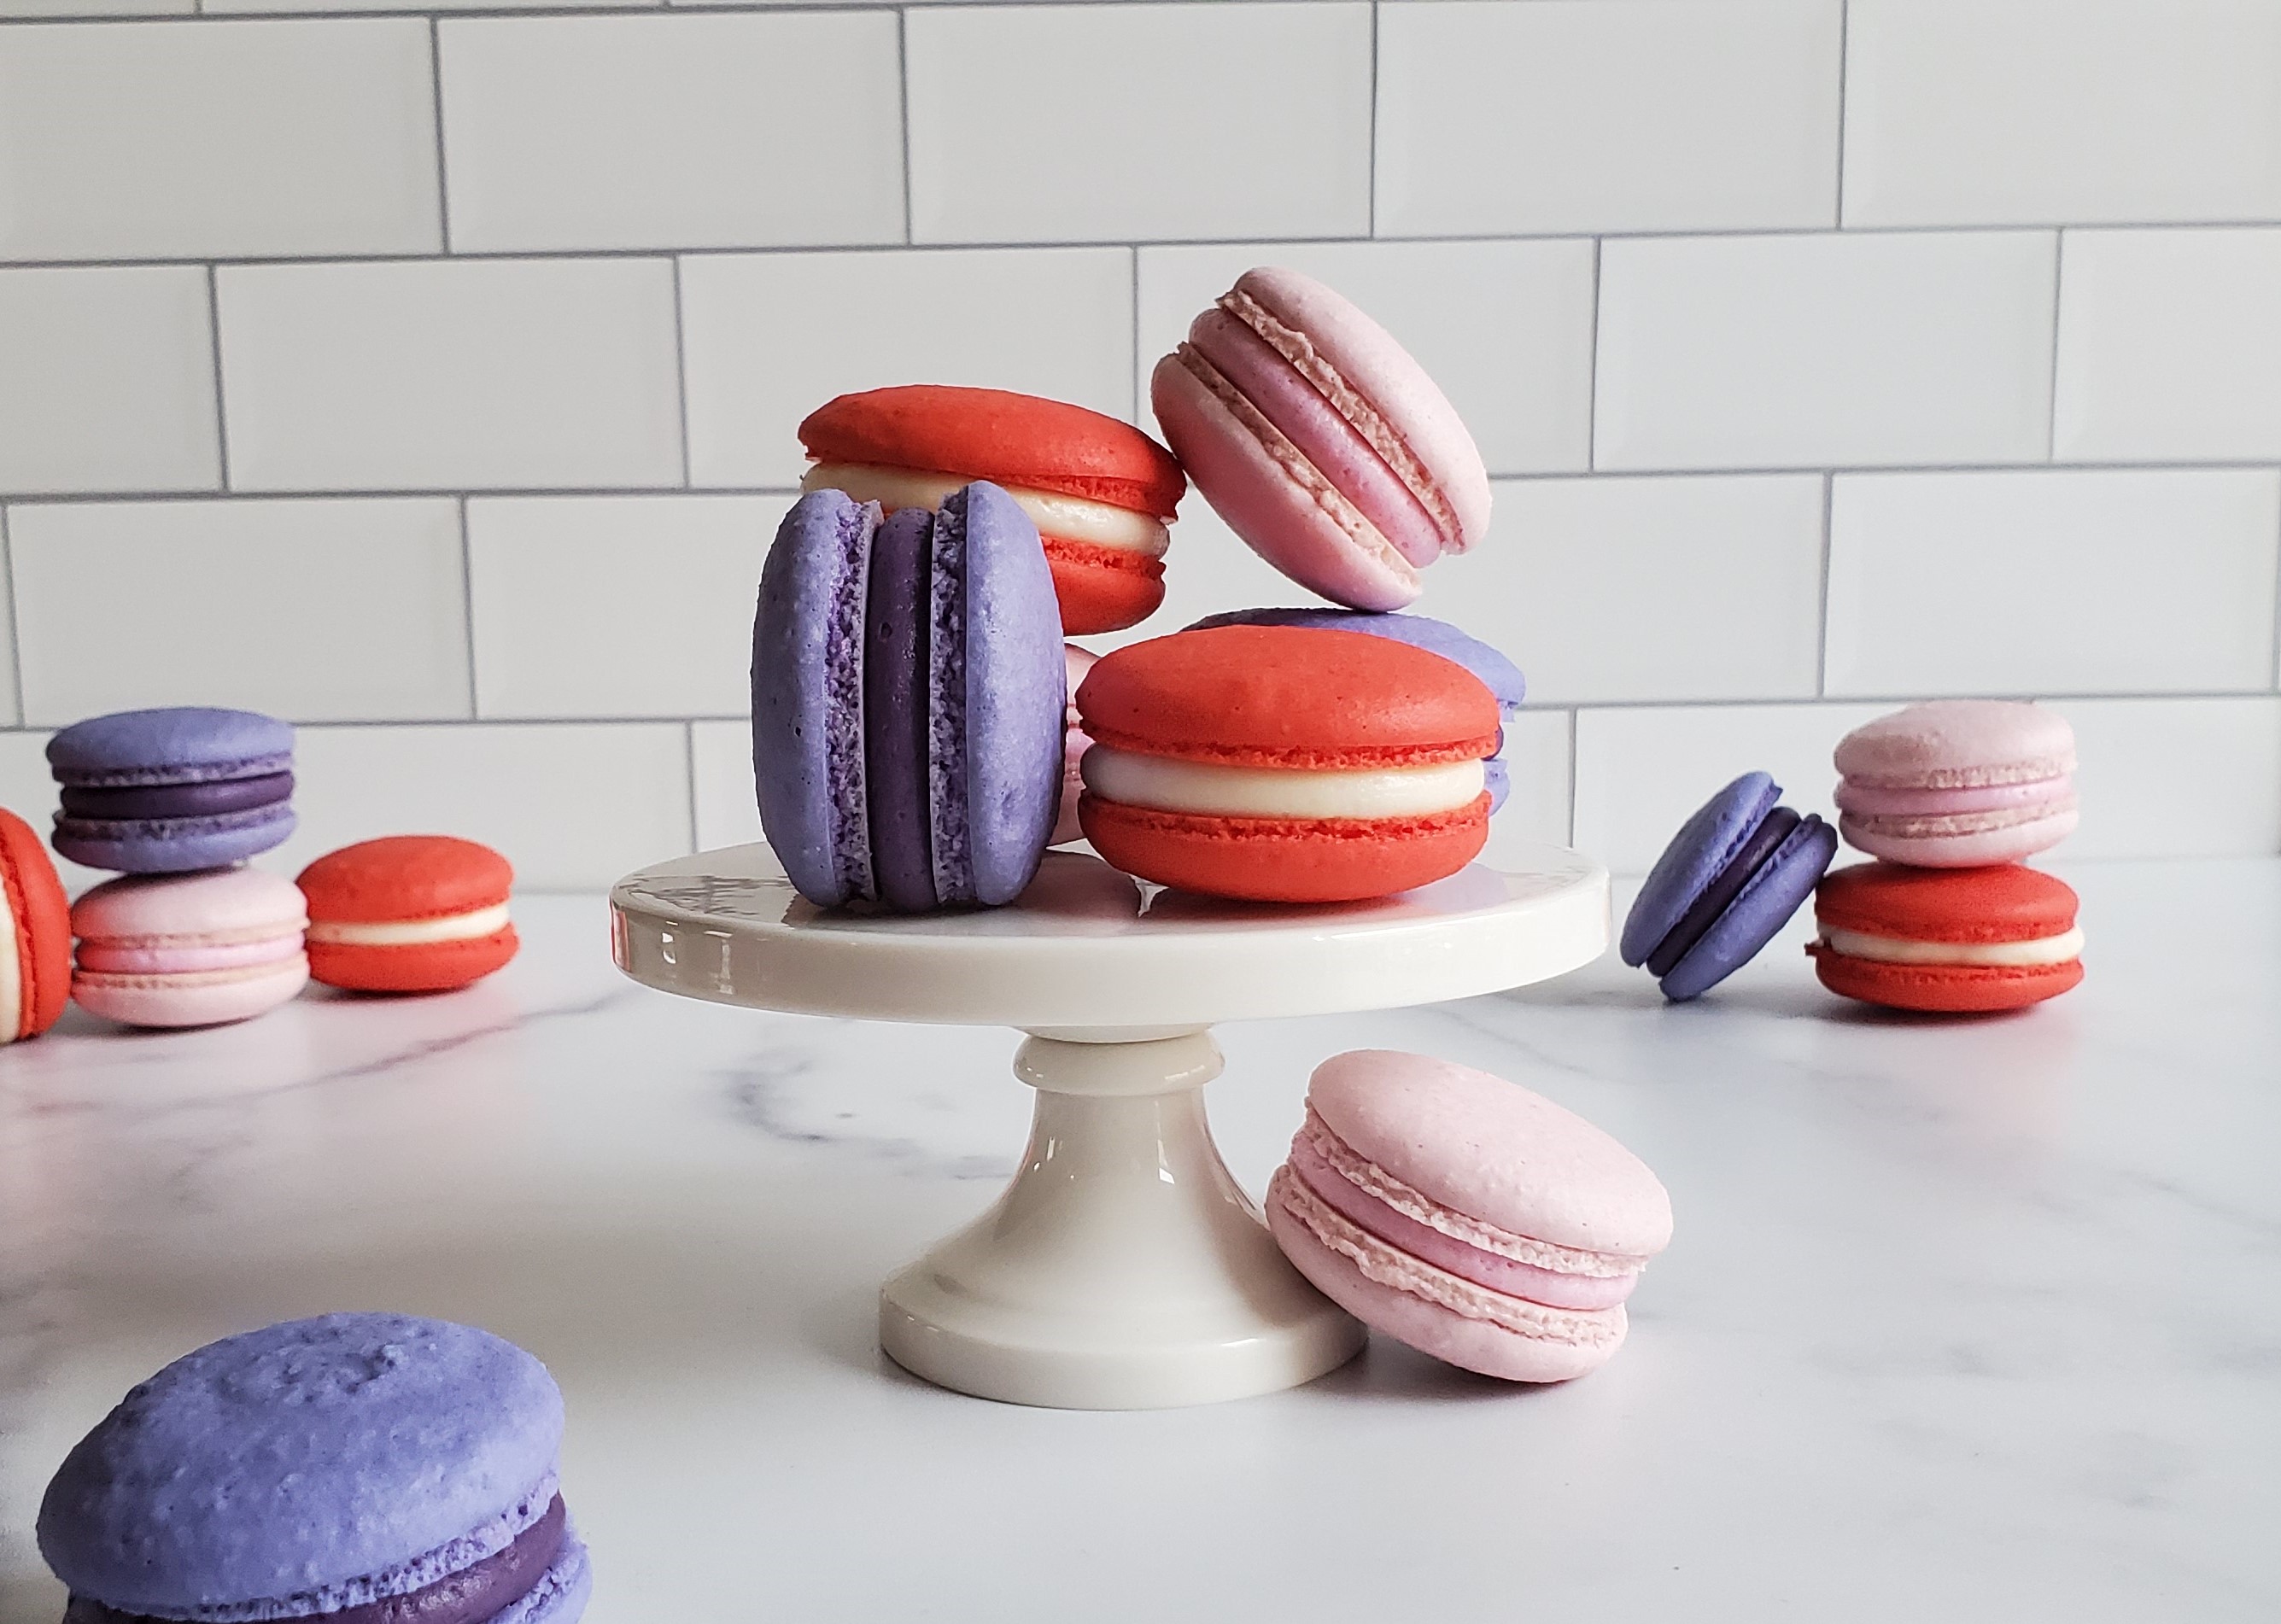 Purple, pink and red macarons, on a mini pedestal in front of a subway tile backsplash and more macarons in the background on a marble countertop.